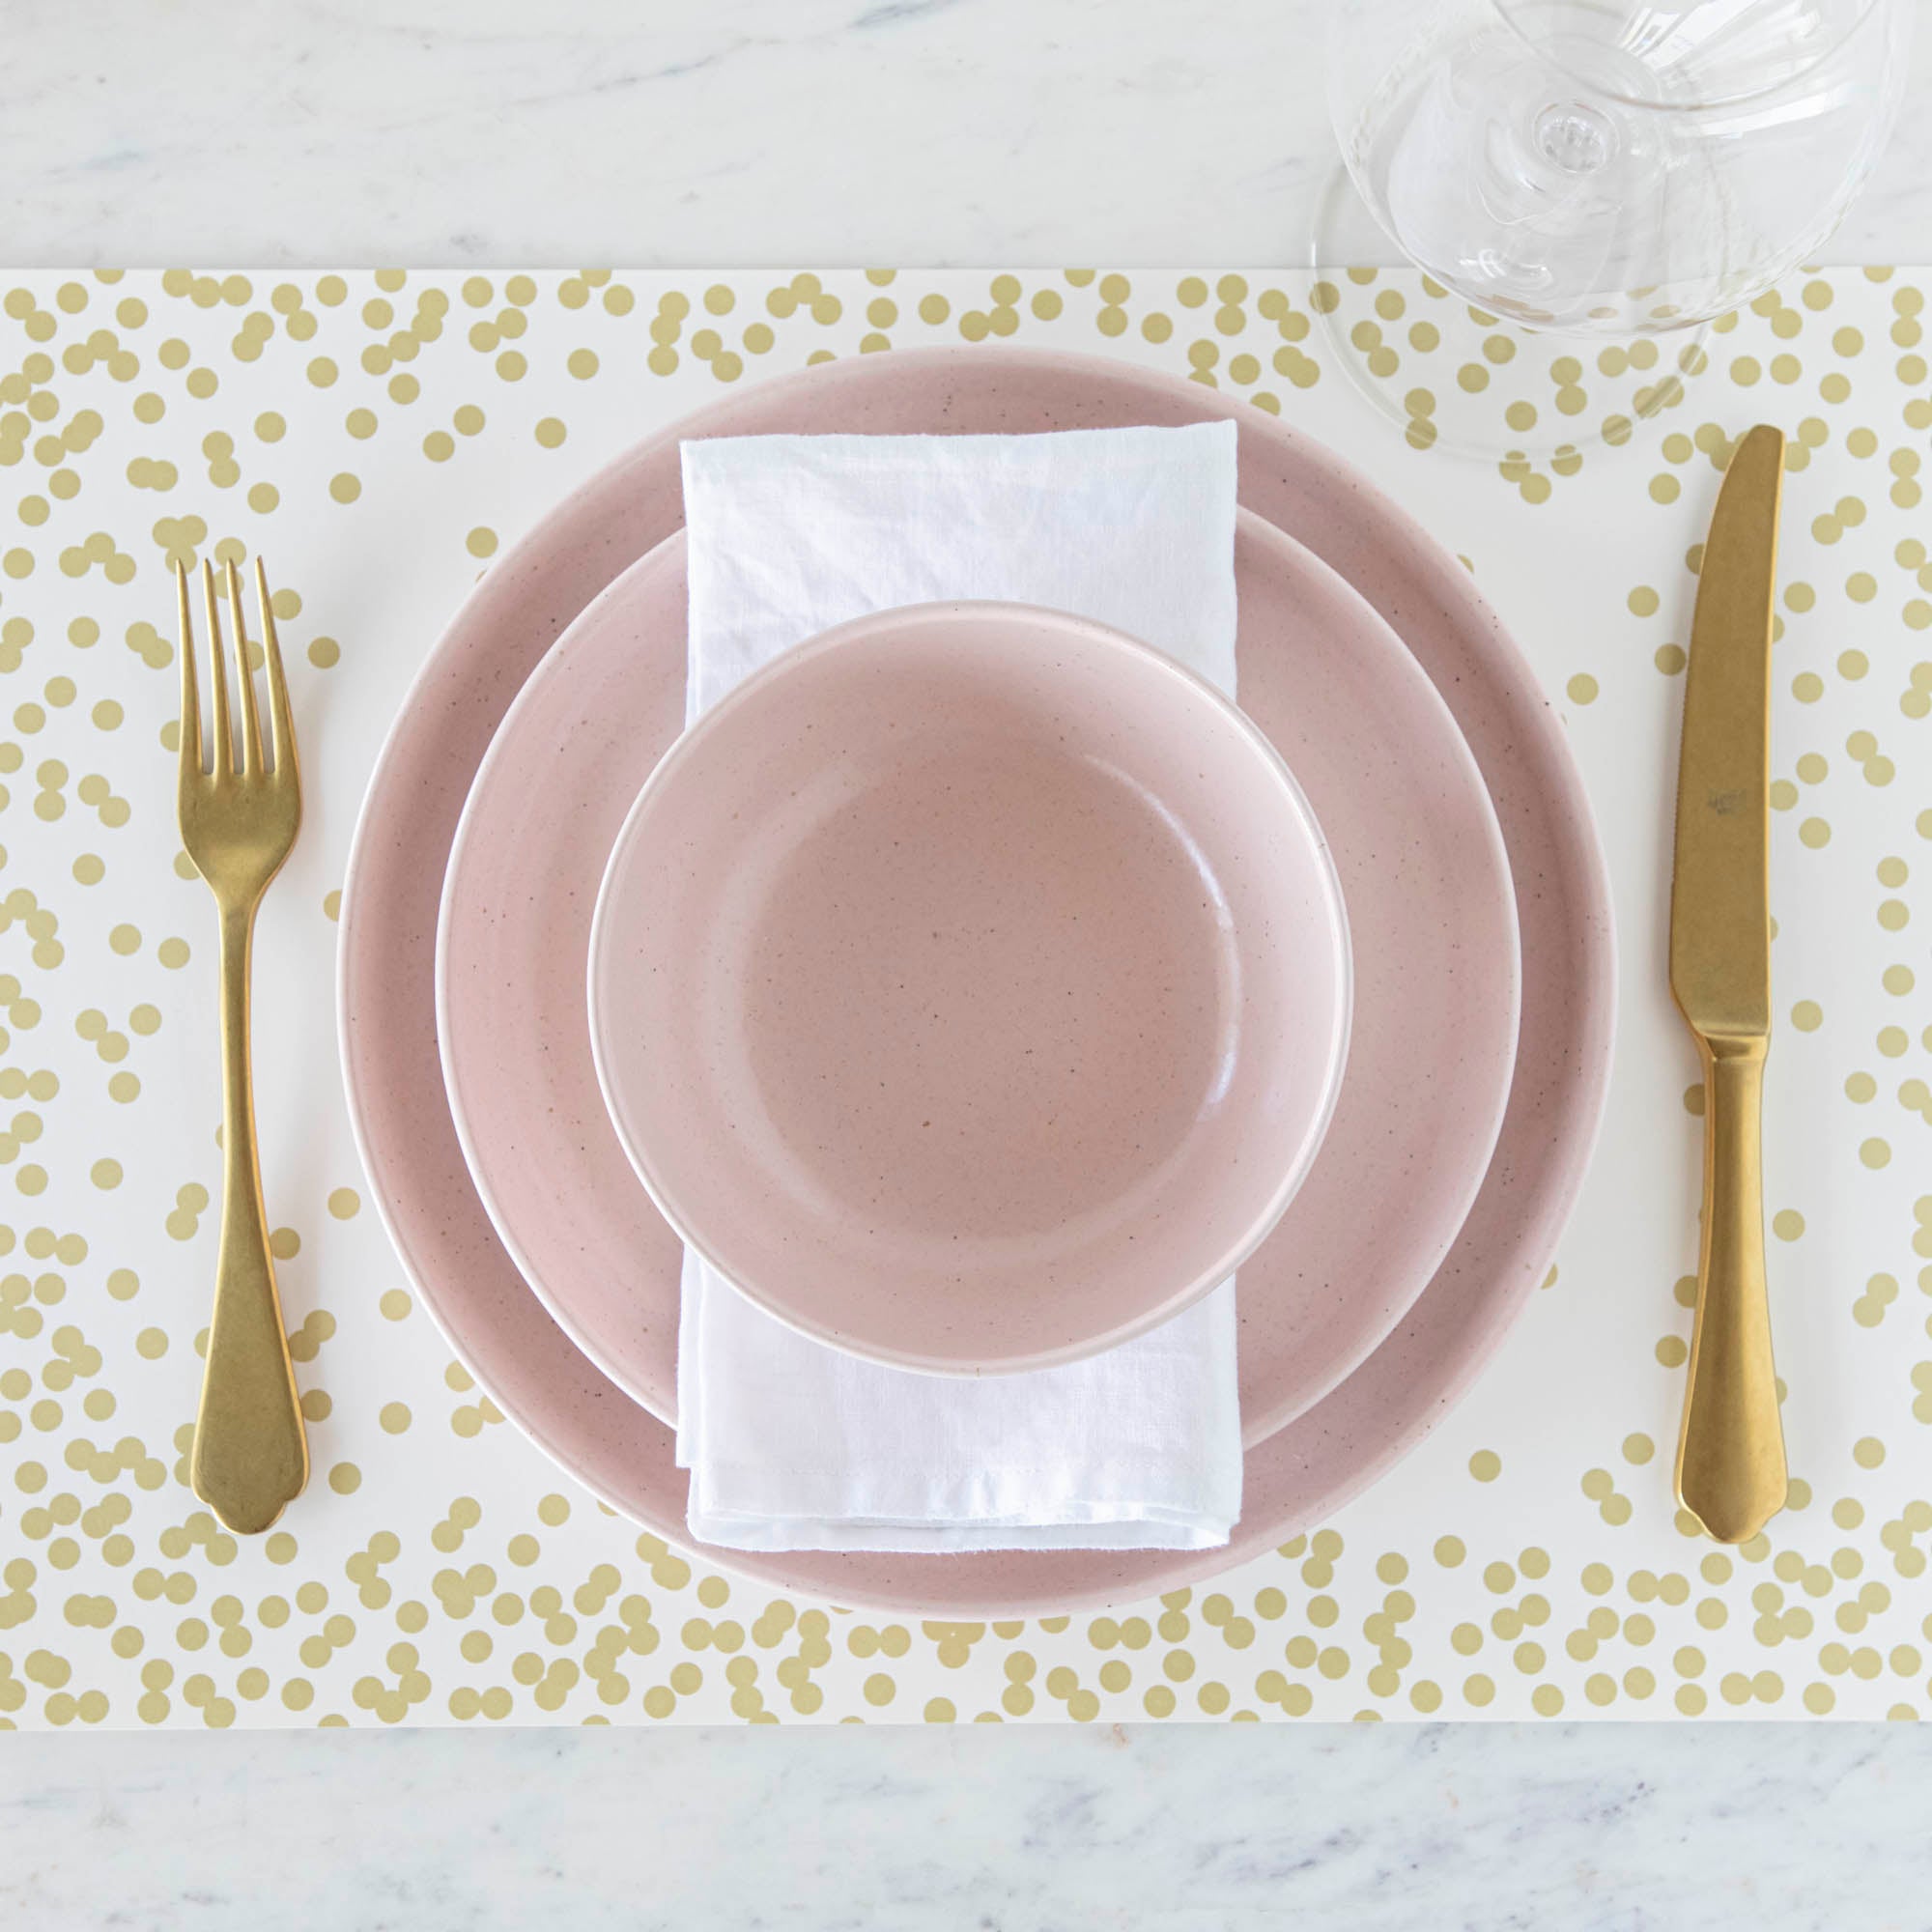 Pink and gold placemat from the Pacifica Marshmallow Dinnerware collection by Casafina Living.